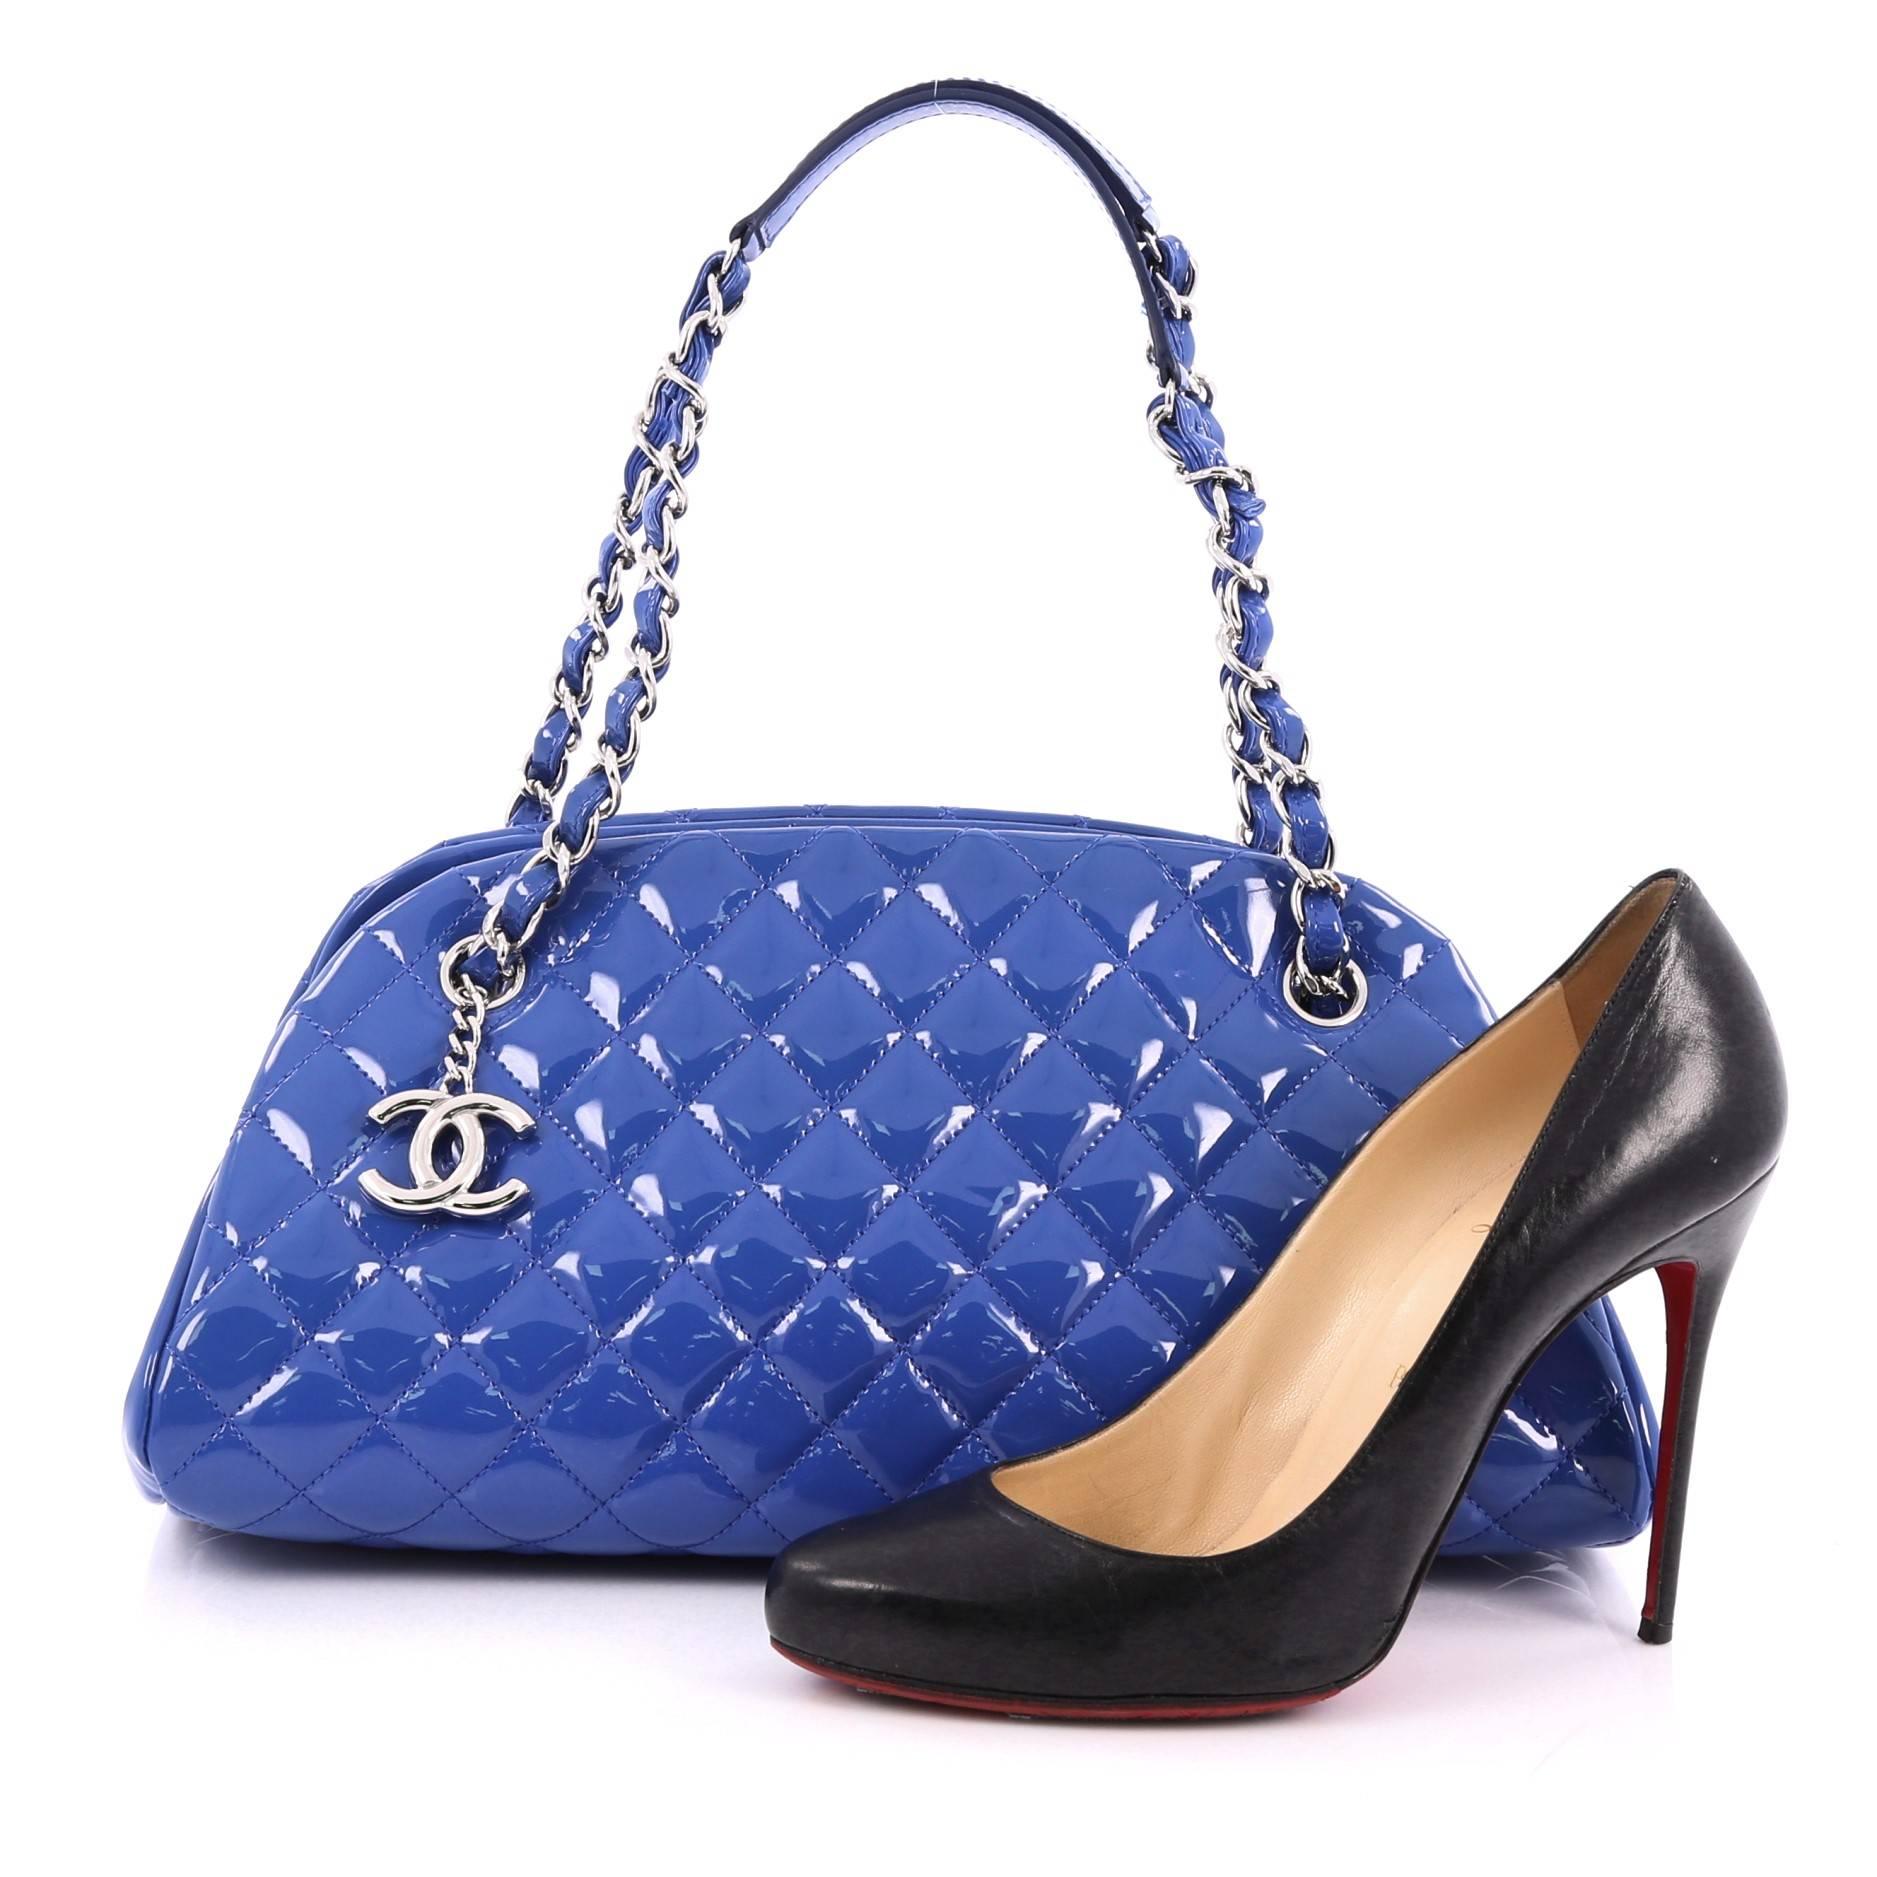 This authentic Chanel Just Mademoiselle Handbag Quilted Patent Medium showcases a sleek style that complements any look. Crafted from royal blue patent leather in Chanel's iconic diamond quilt pattern, this bag features woven-in leather chain straps